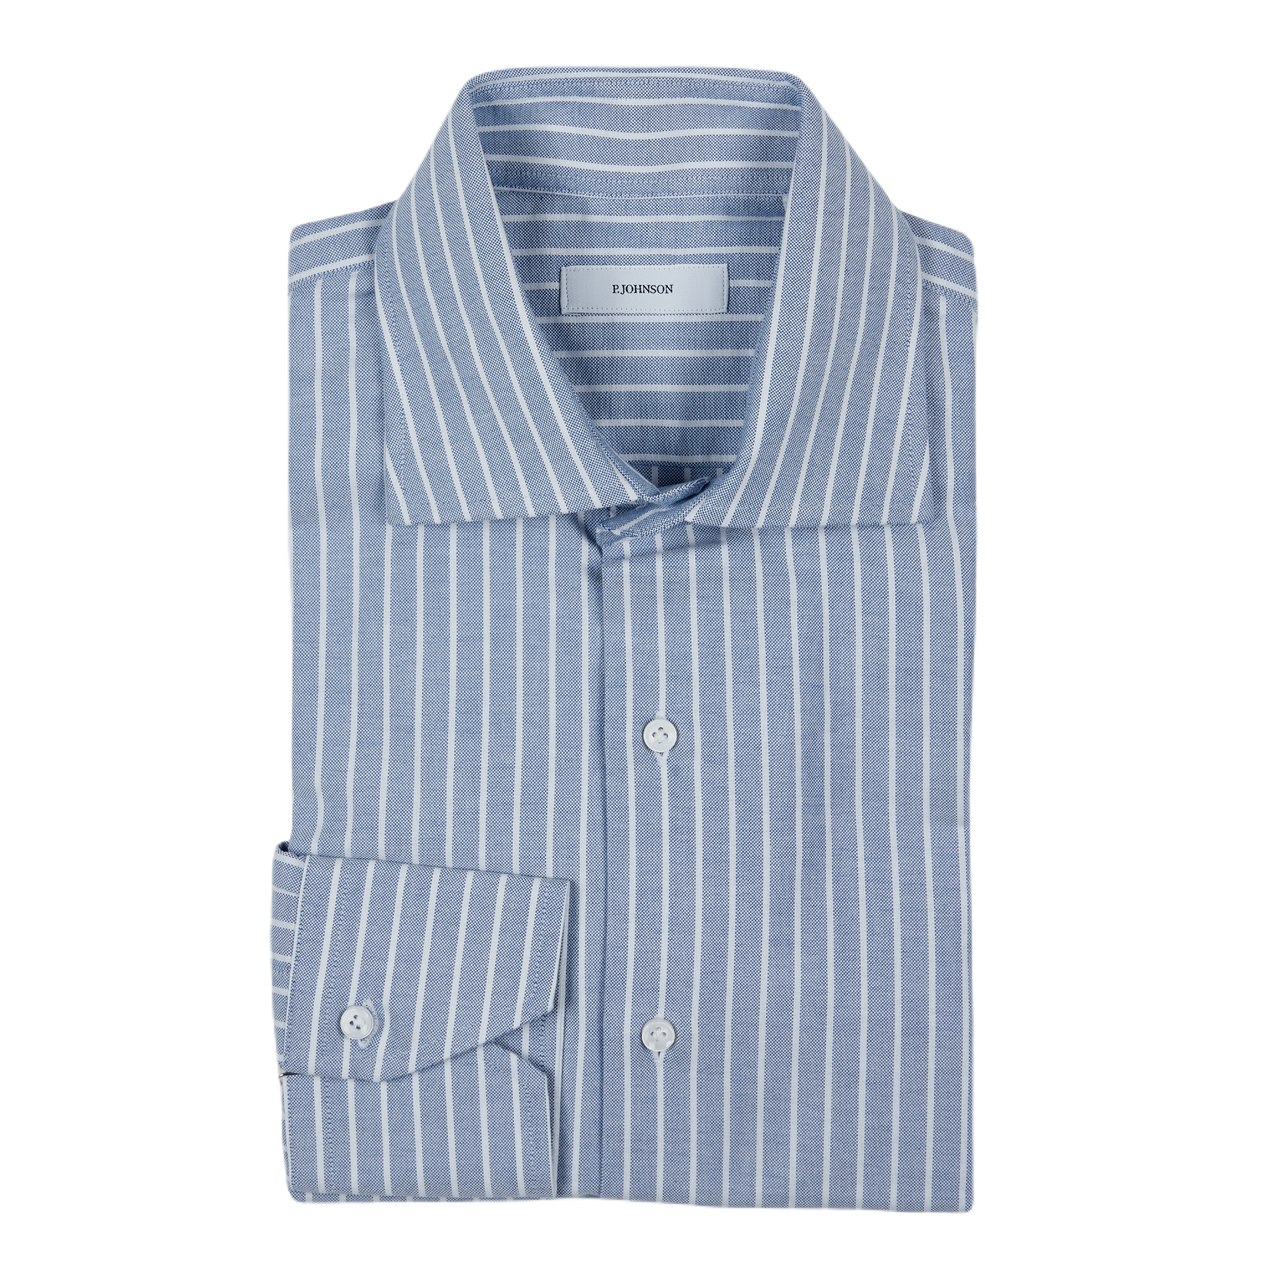 P. Johnson Shirt in Blue and White Narrow Stripe Cotton Oxford with Spread Collar